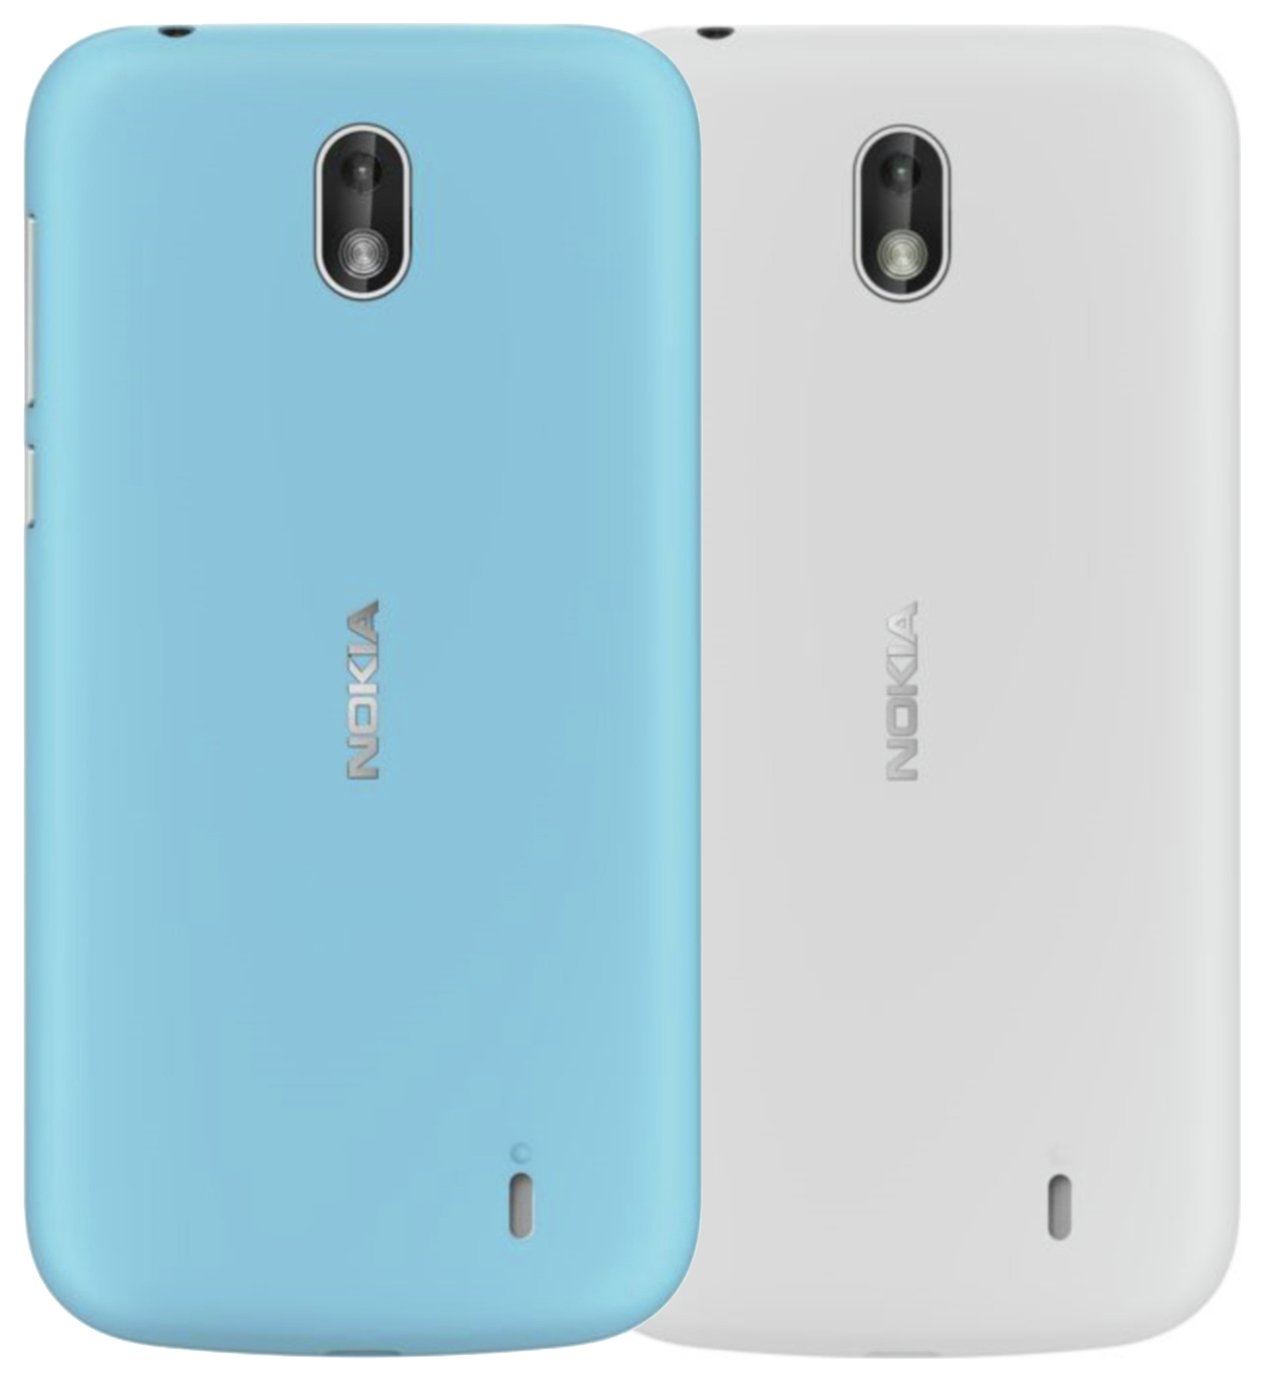 Nokia 1 Xpress-on Phone Covers 2 Pack review